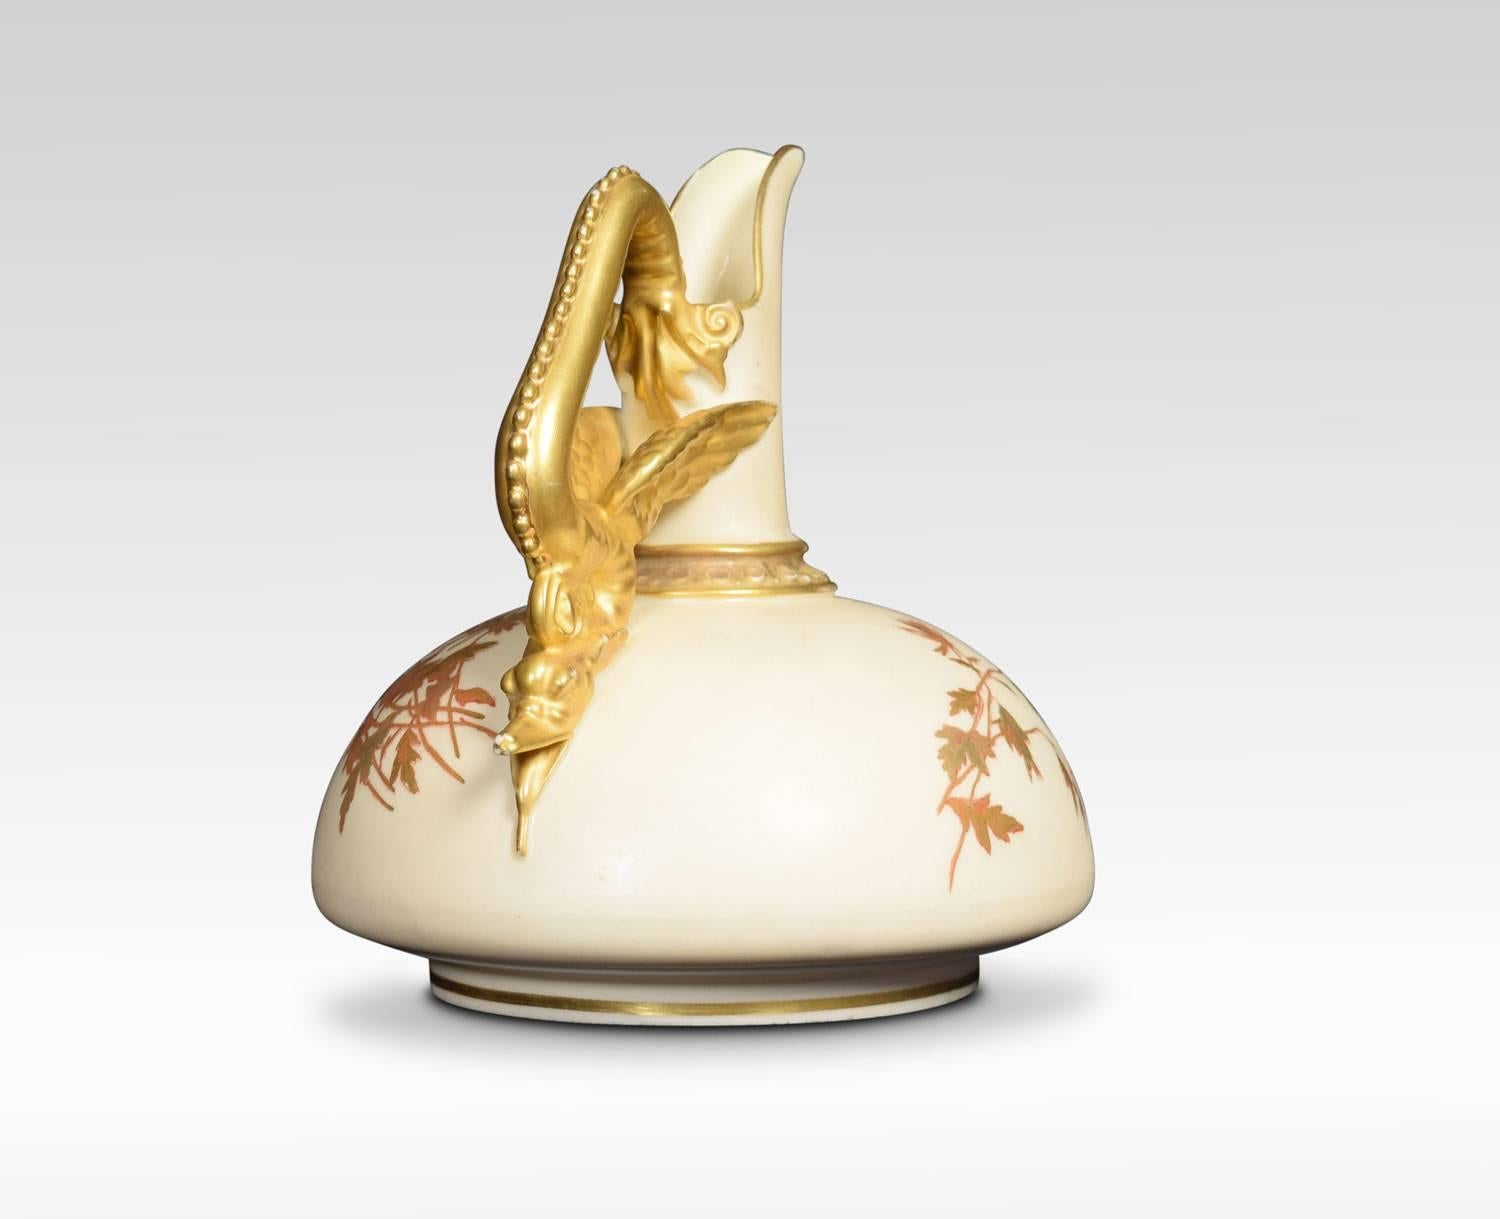 Royal Worcester ewer, with winged dragon handle, painted with flowers and leaves against an ivory ground.
Dimensions:
Height 6 inches
Width 5.5 inches
Depth 6 inches.